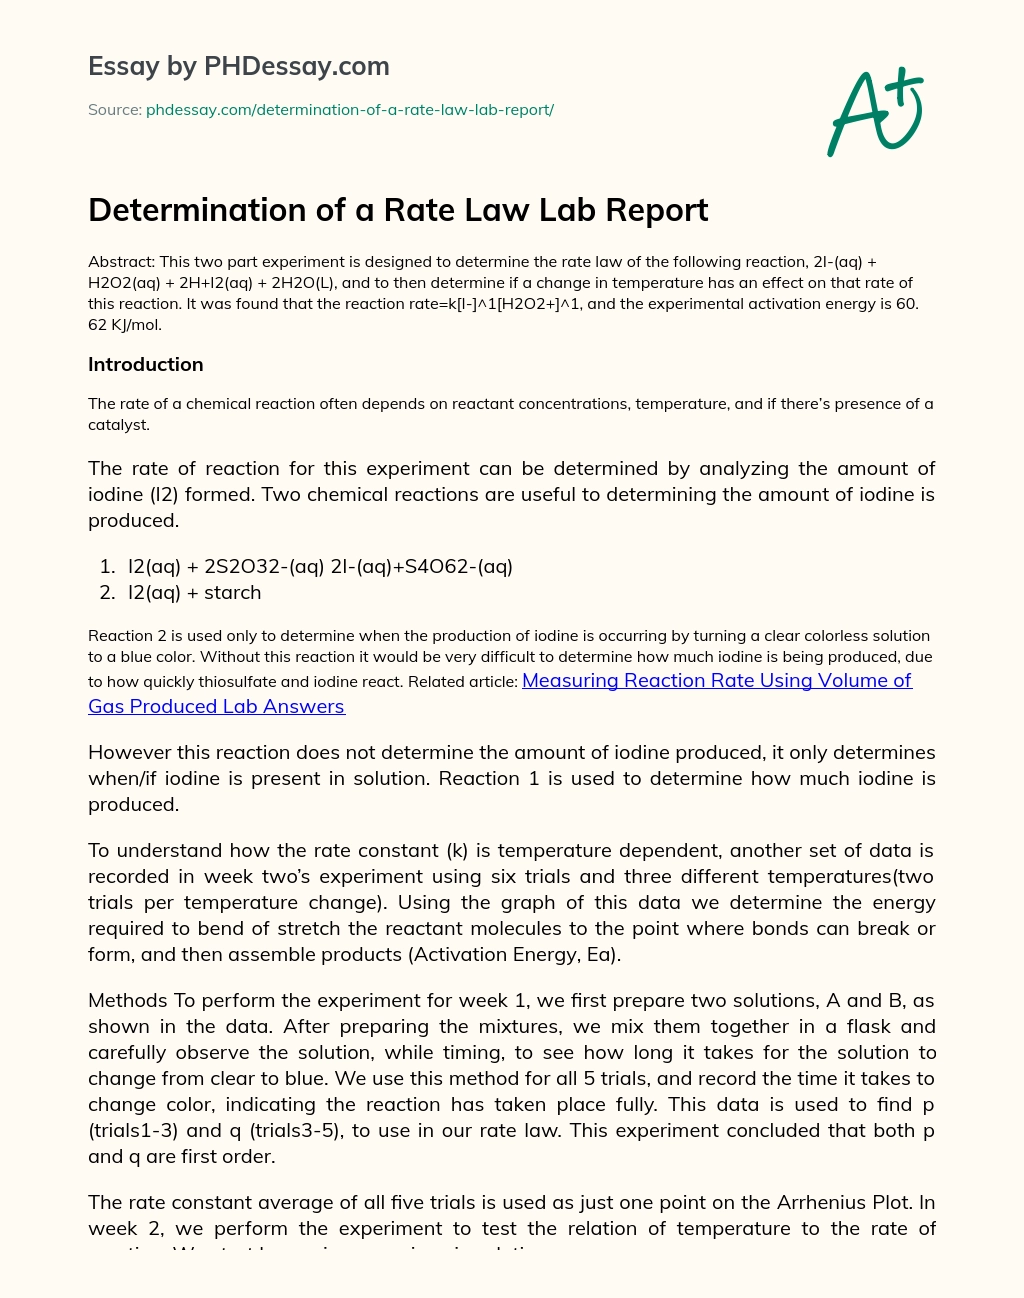 Determination of a Rate Law Lab Report essay